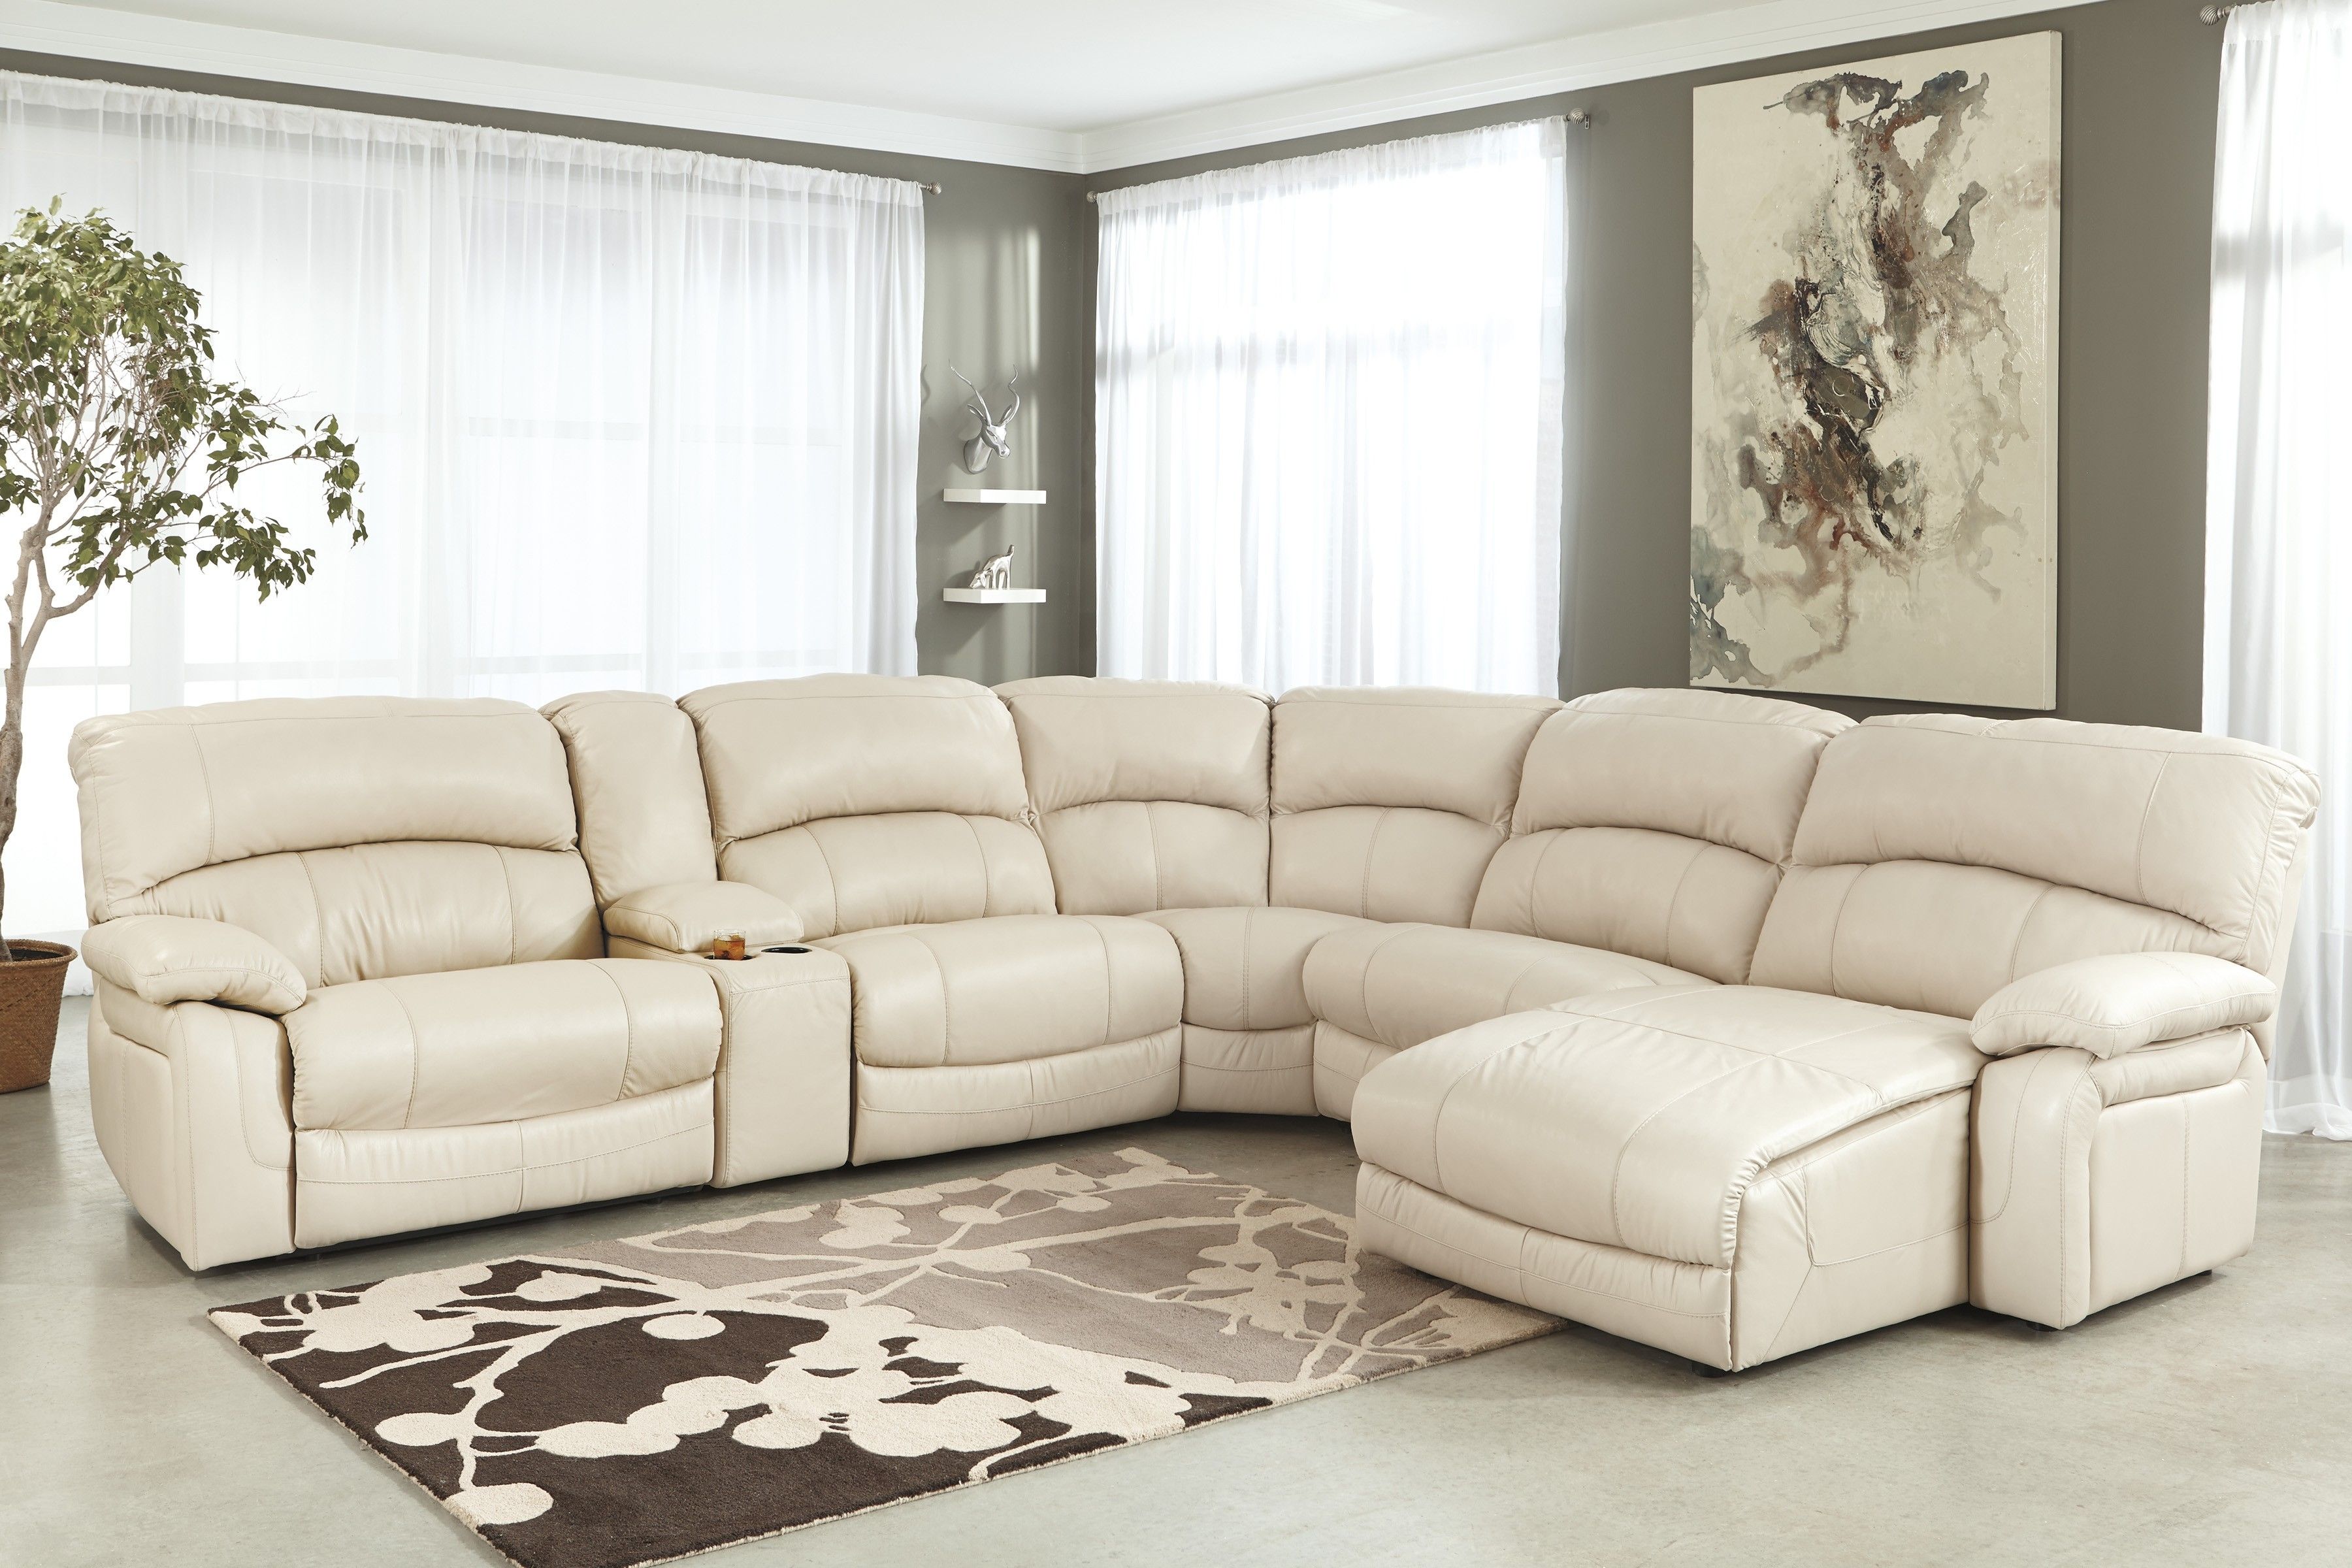 Uncategorized : Off White Leather Sectional Within Lovely Sofas For Off White Leather Sofas (View 6 of 10)